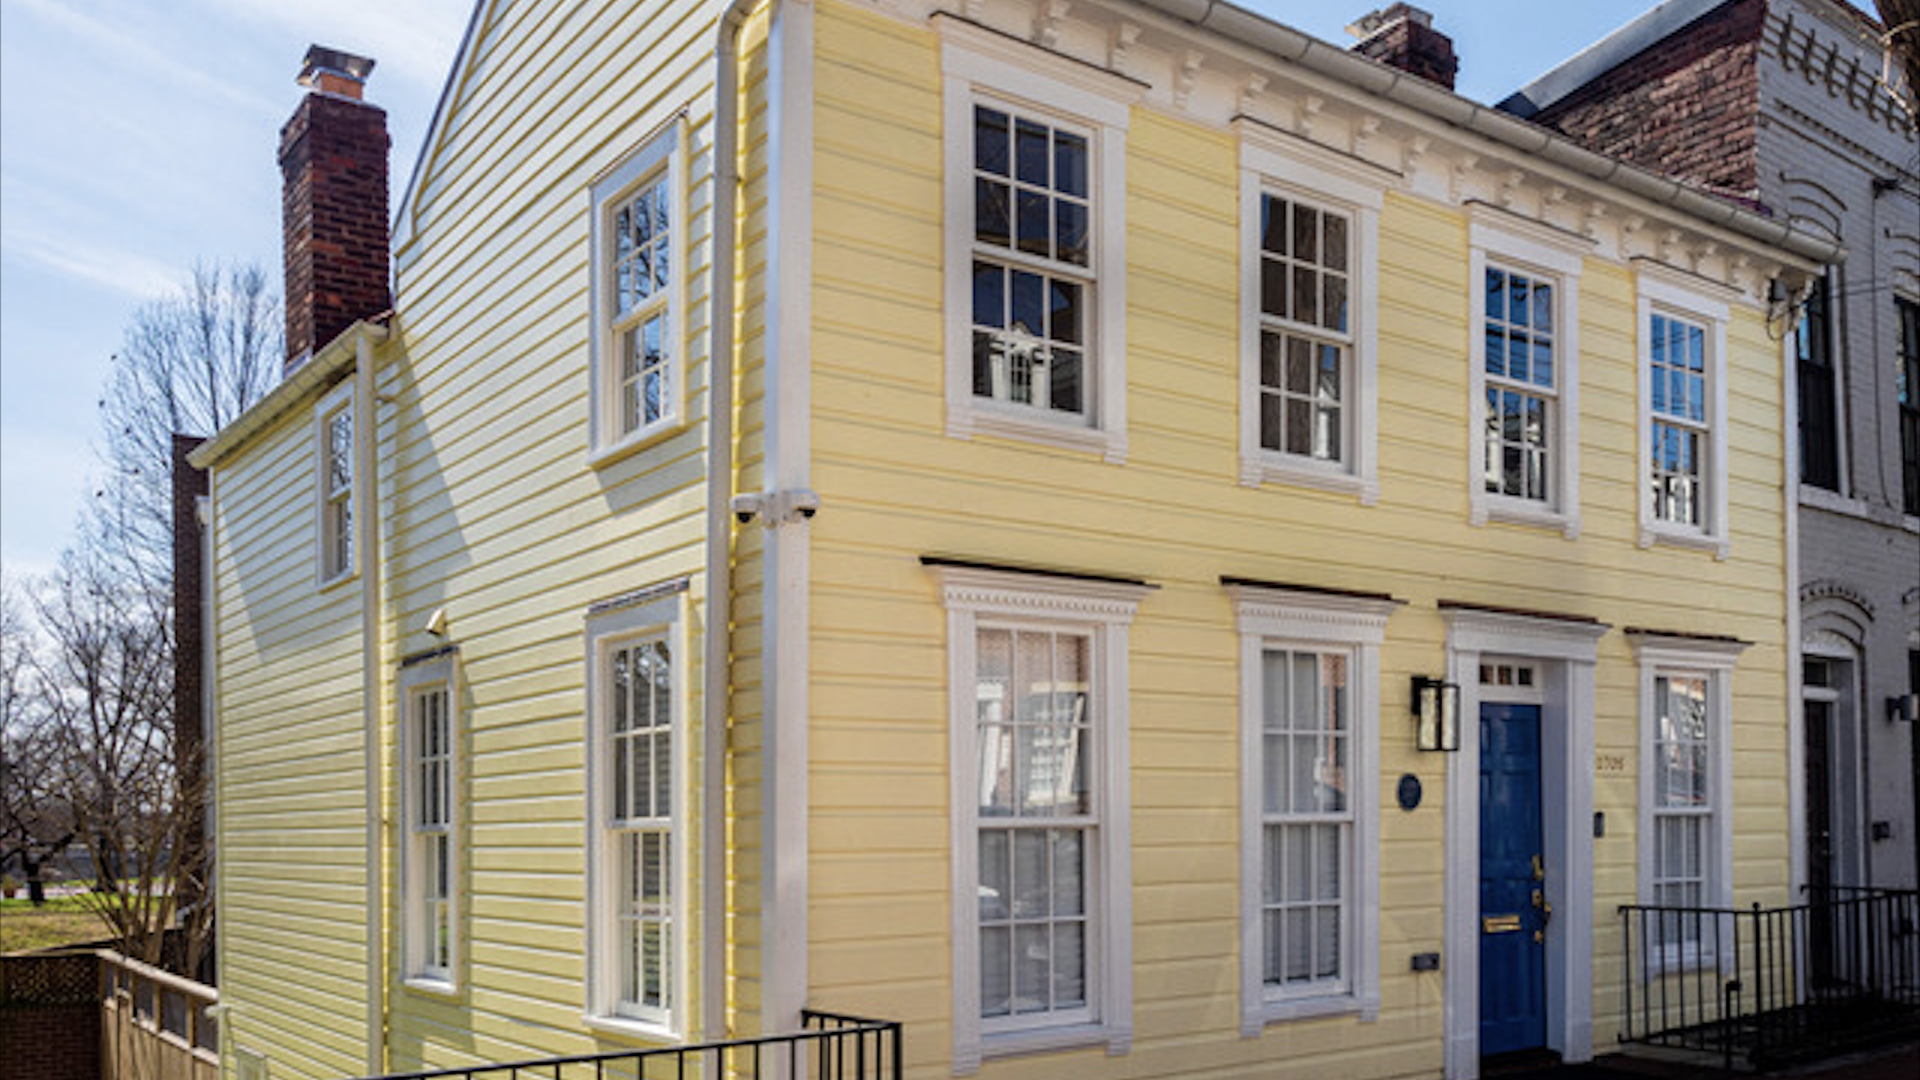 A yellow townhouse with a blue door